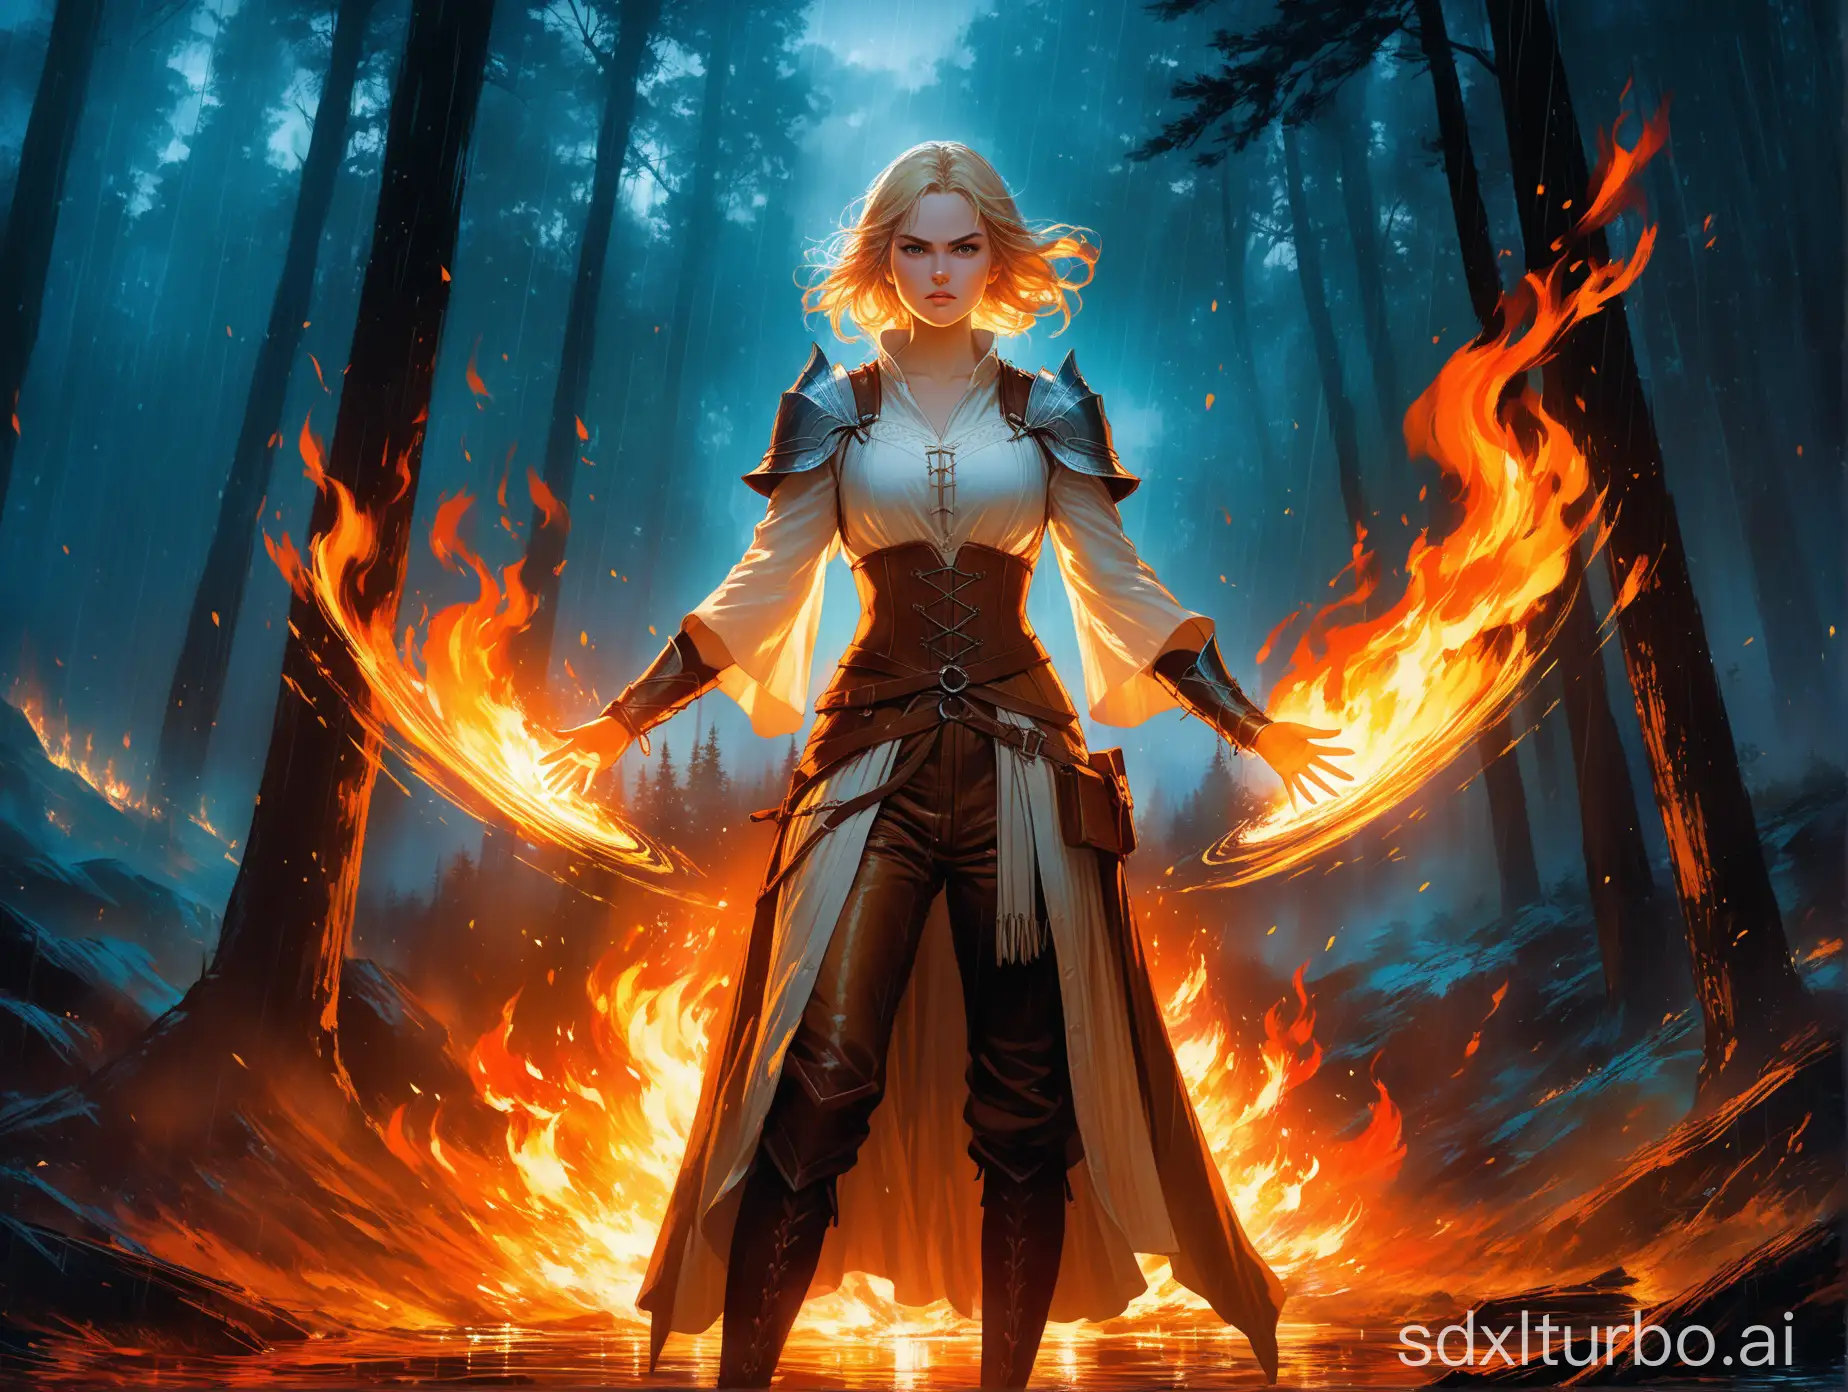 high quality, 8K Ultra HD, imagining a very beautiful warrior, short blonde hair surrounded by fire, throwing flames from her hands. She has an angry expression. She is wearing medieval clothes, white cotton shirt and brown leather pants, Lord of the Rings style. With the background under the rainy night sky surrounded by forest lights. The elf is enveloped in fire. She's having a storm. John Singer Sargent's art highlights the characteristics of the . illustration with combined and vibrant abyssal colors, vibrant frame, FULL BODY, radiating fire. Angry expression on the face, forest scenery, full body, hyper-detailed painting, luminism, art by Carne Griffiths and Wadim Kashin concept art, 8k resolution,